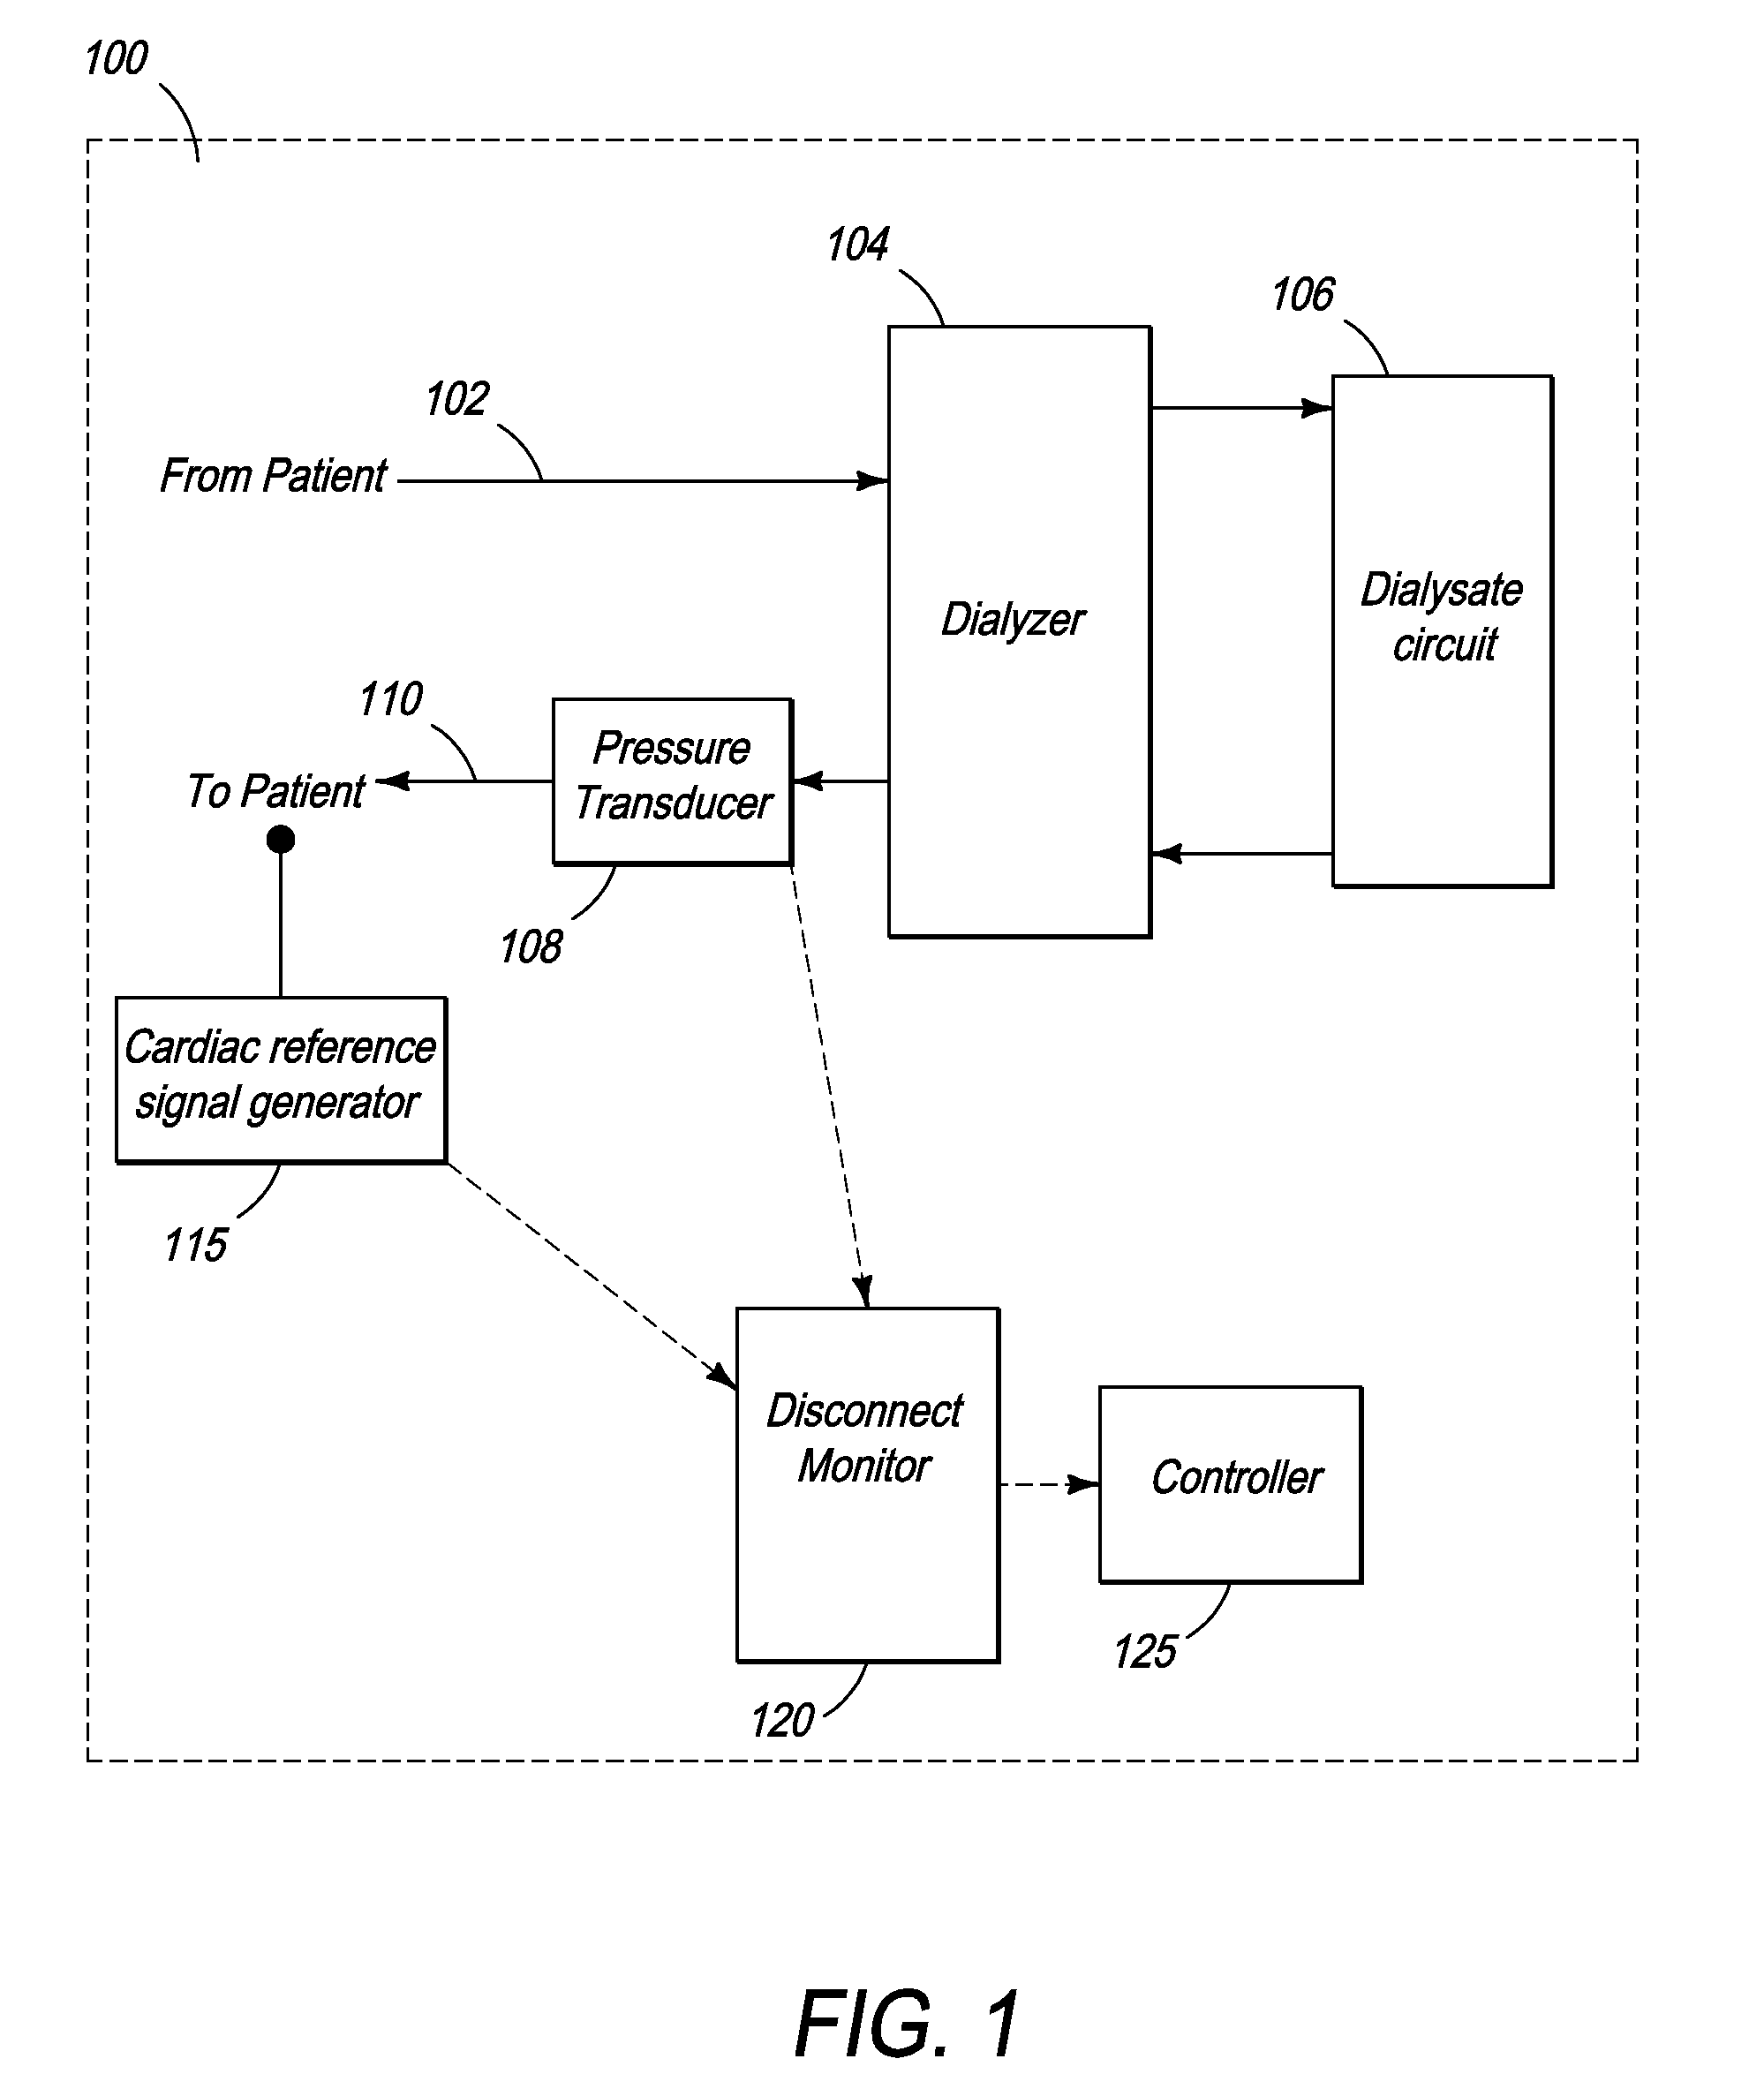 System and Method for Detection of Disconnection in an Extracorporeal Blood Circuit